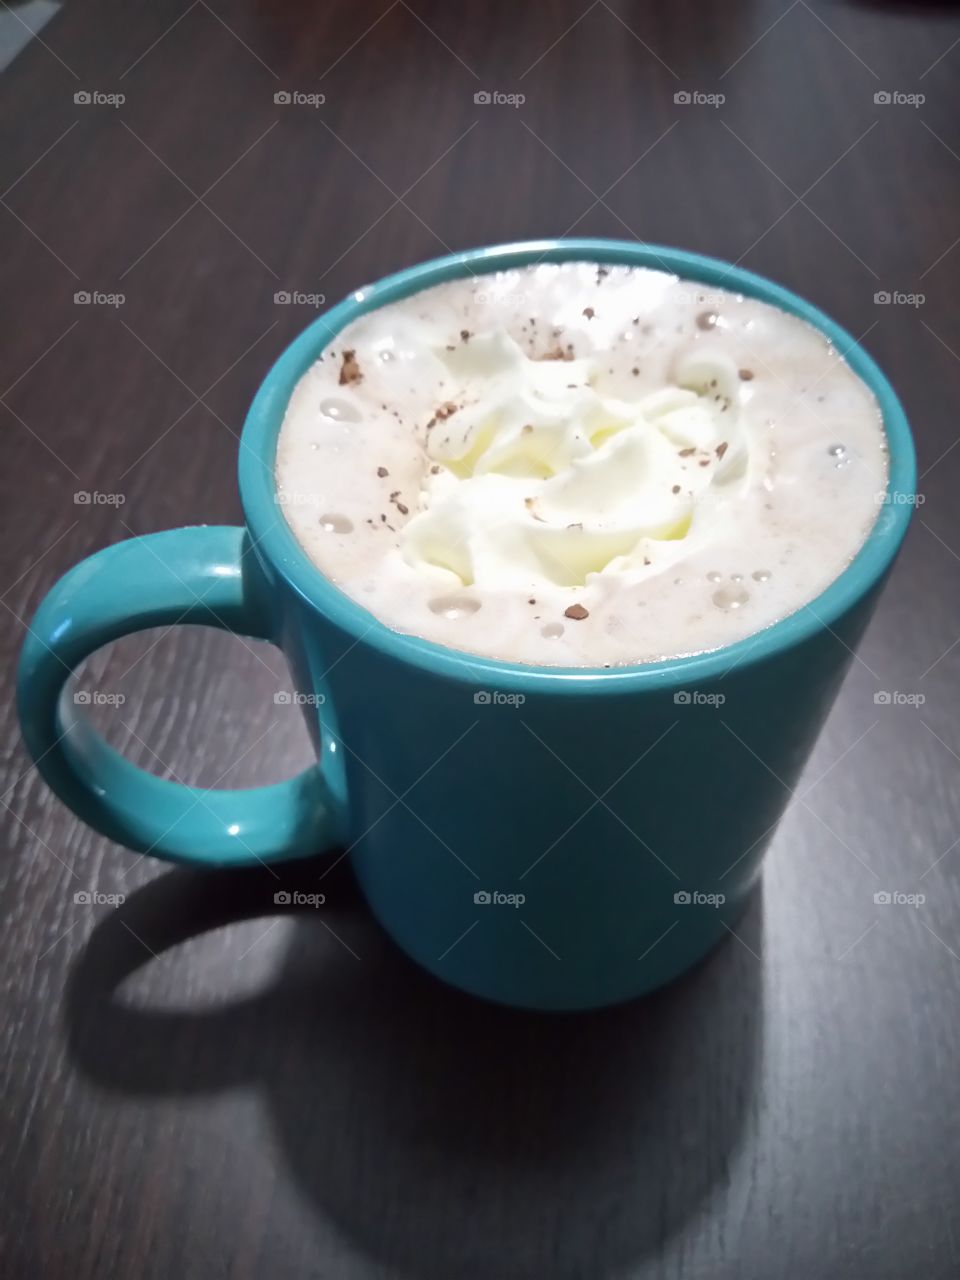 homemade mocha latte with whip cream on top and dash of cocoa.yummm